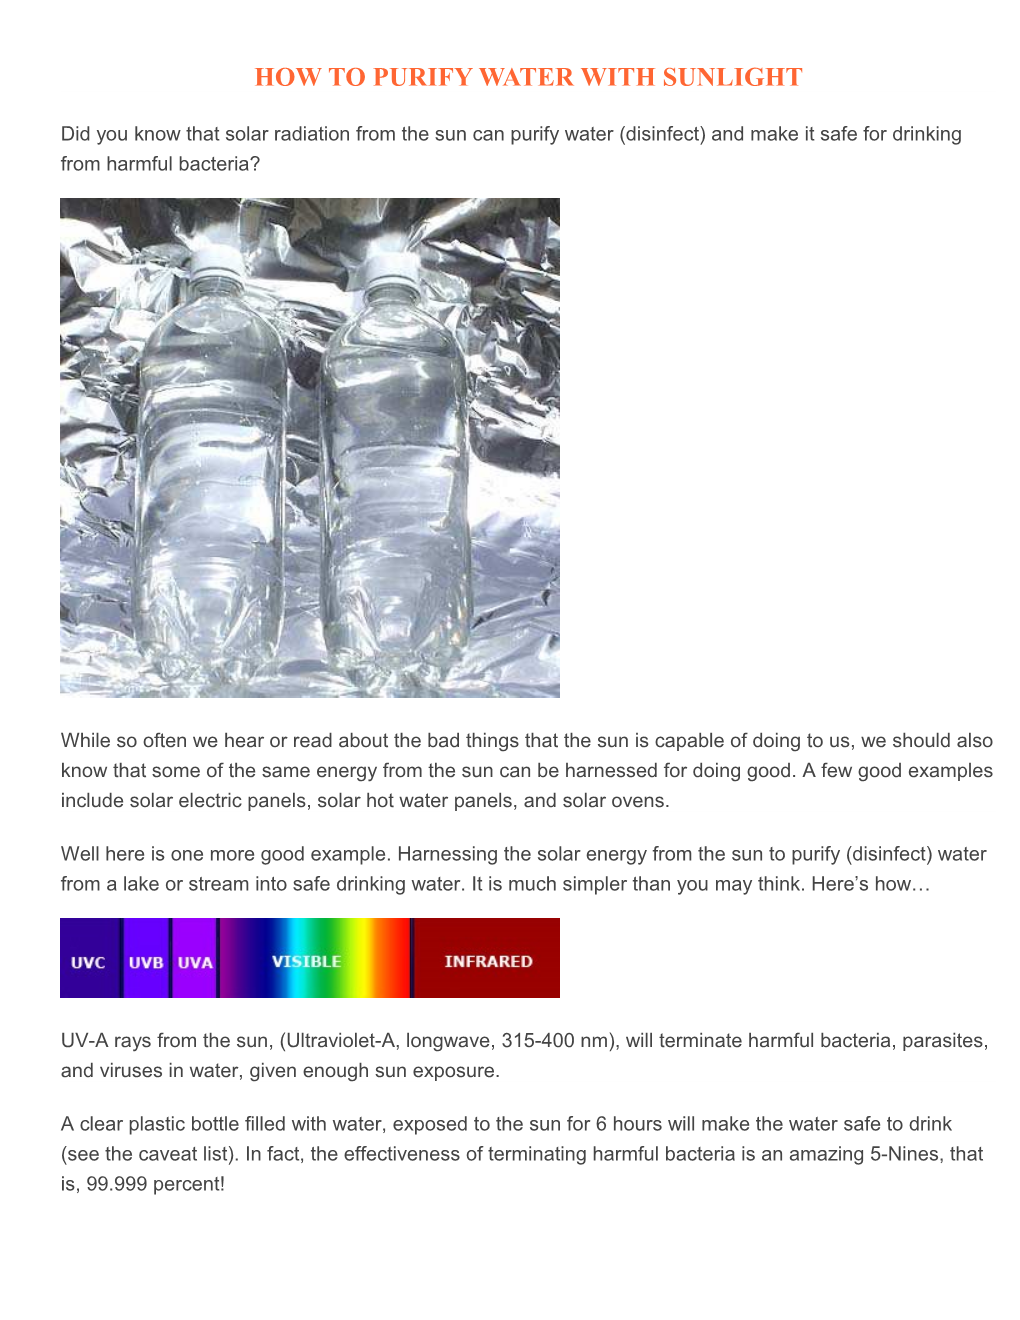 How to Purify Water with Sunlight